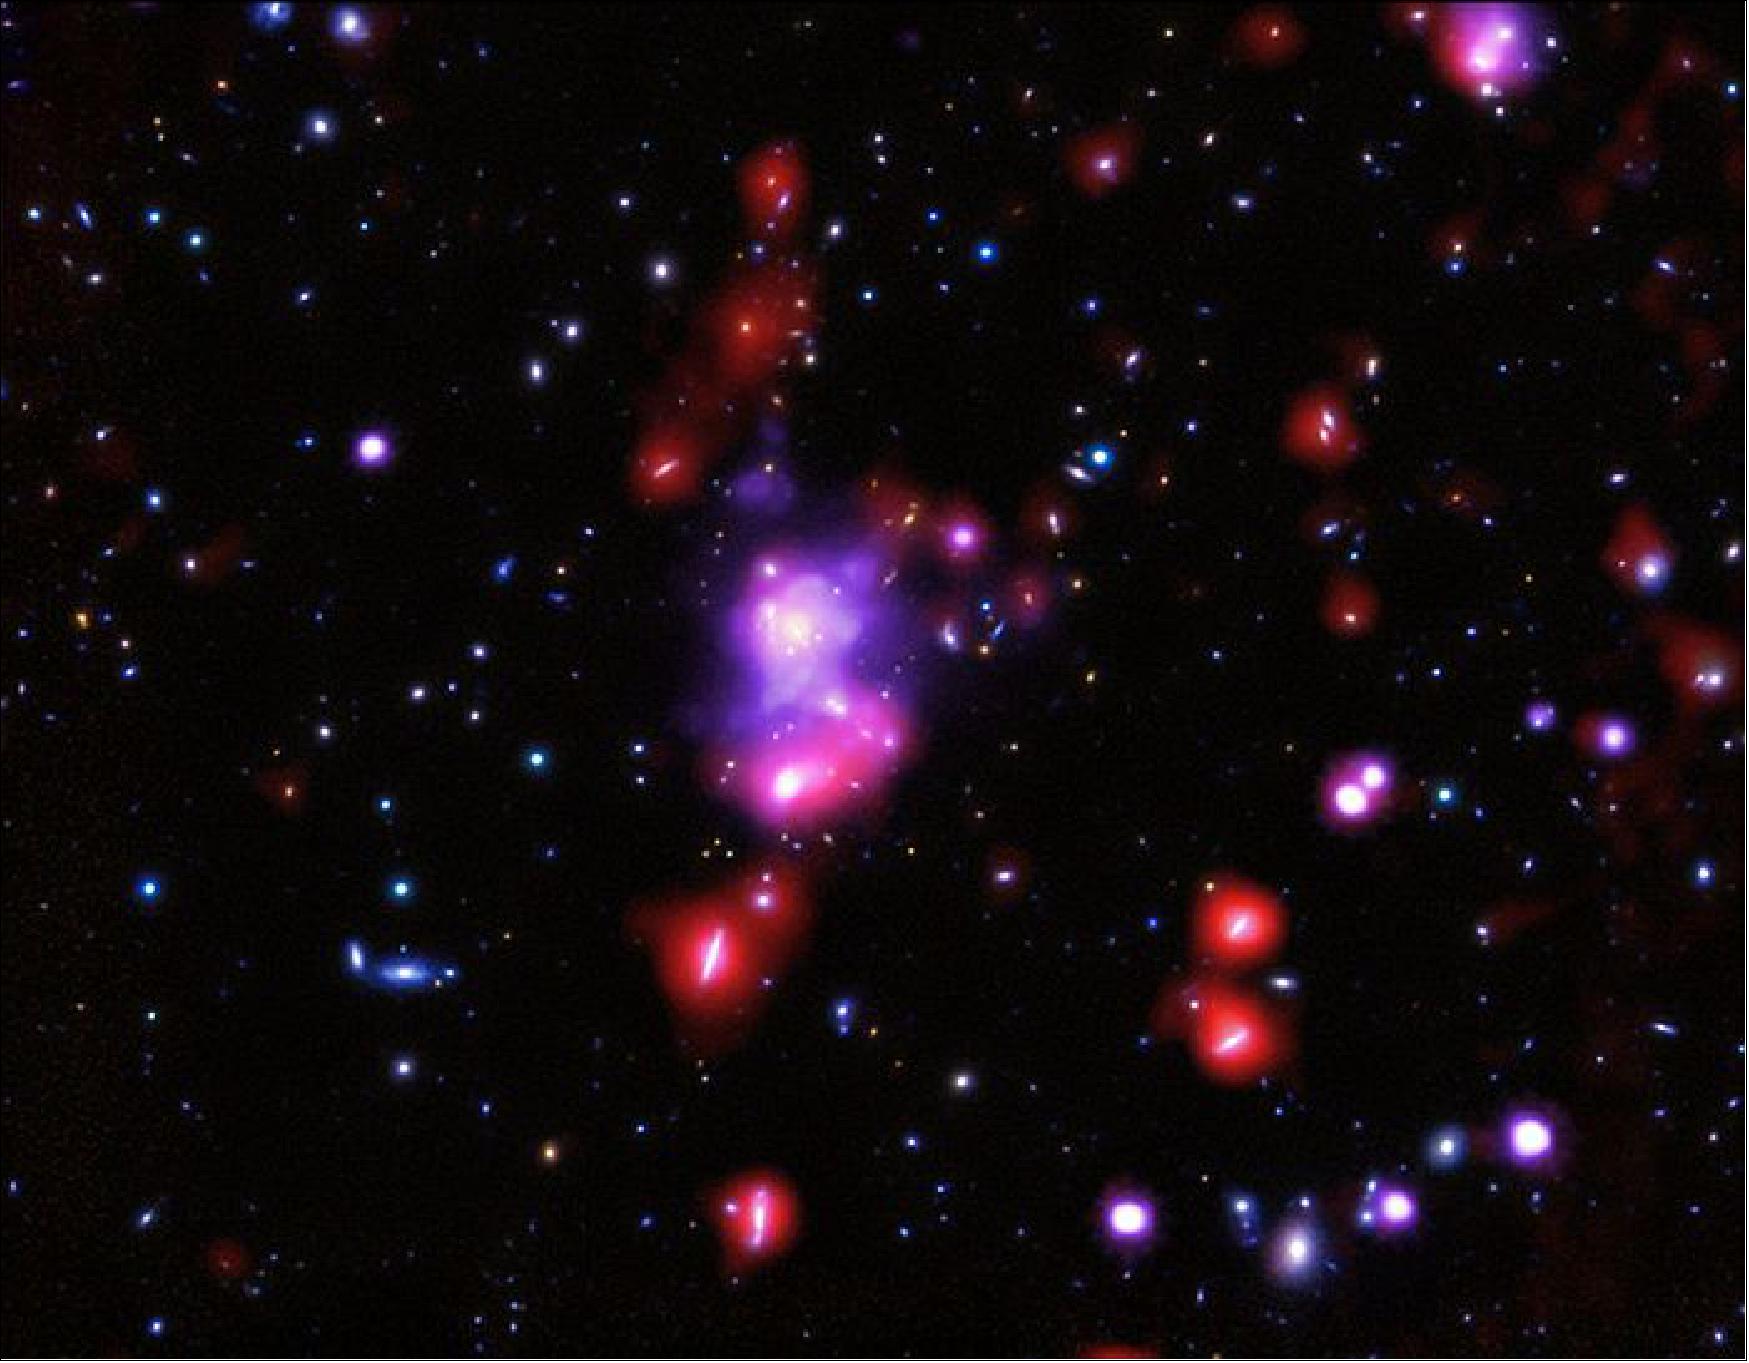 Figure 54: This multi-telescope composite of Herschel combines X-ray, infrared and optical data of the galaxy cluster XDCPJ0044.0-2033 (image credit: X-ray: NASA/CXC/INAF/P.Tozzi, et al; Optical: NAOJ/Subaru and ESO/VLT; Infrared: ESA/Herschel/J. Santos, et al.)